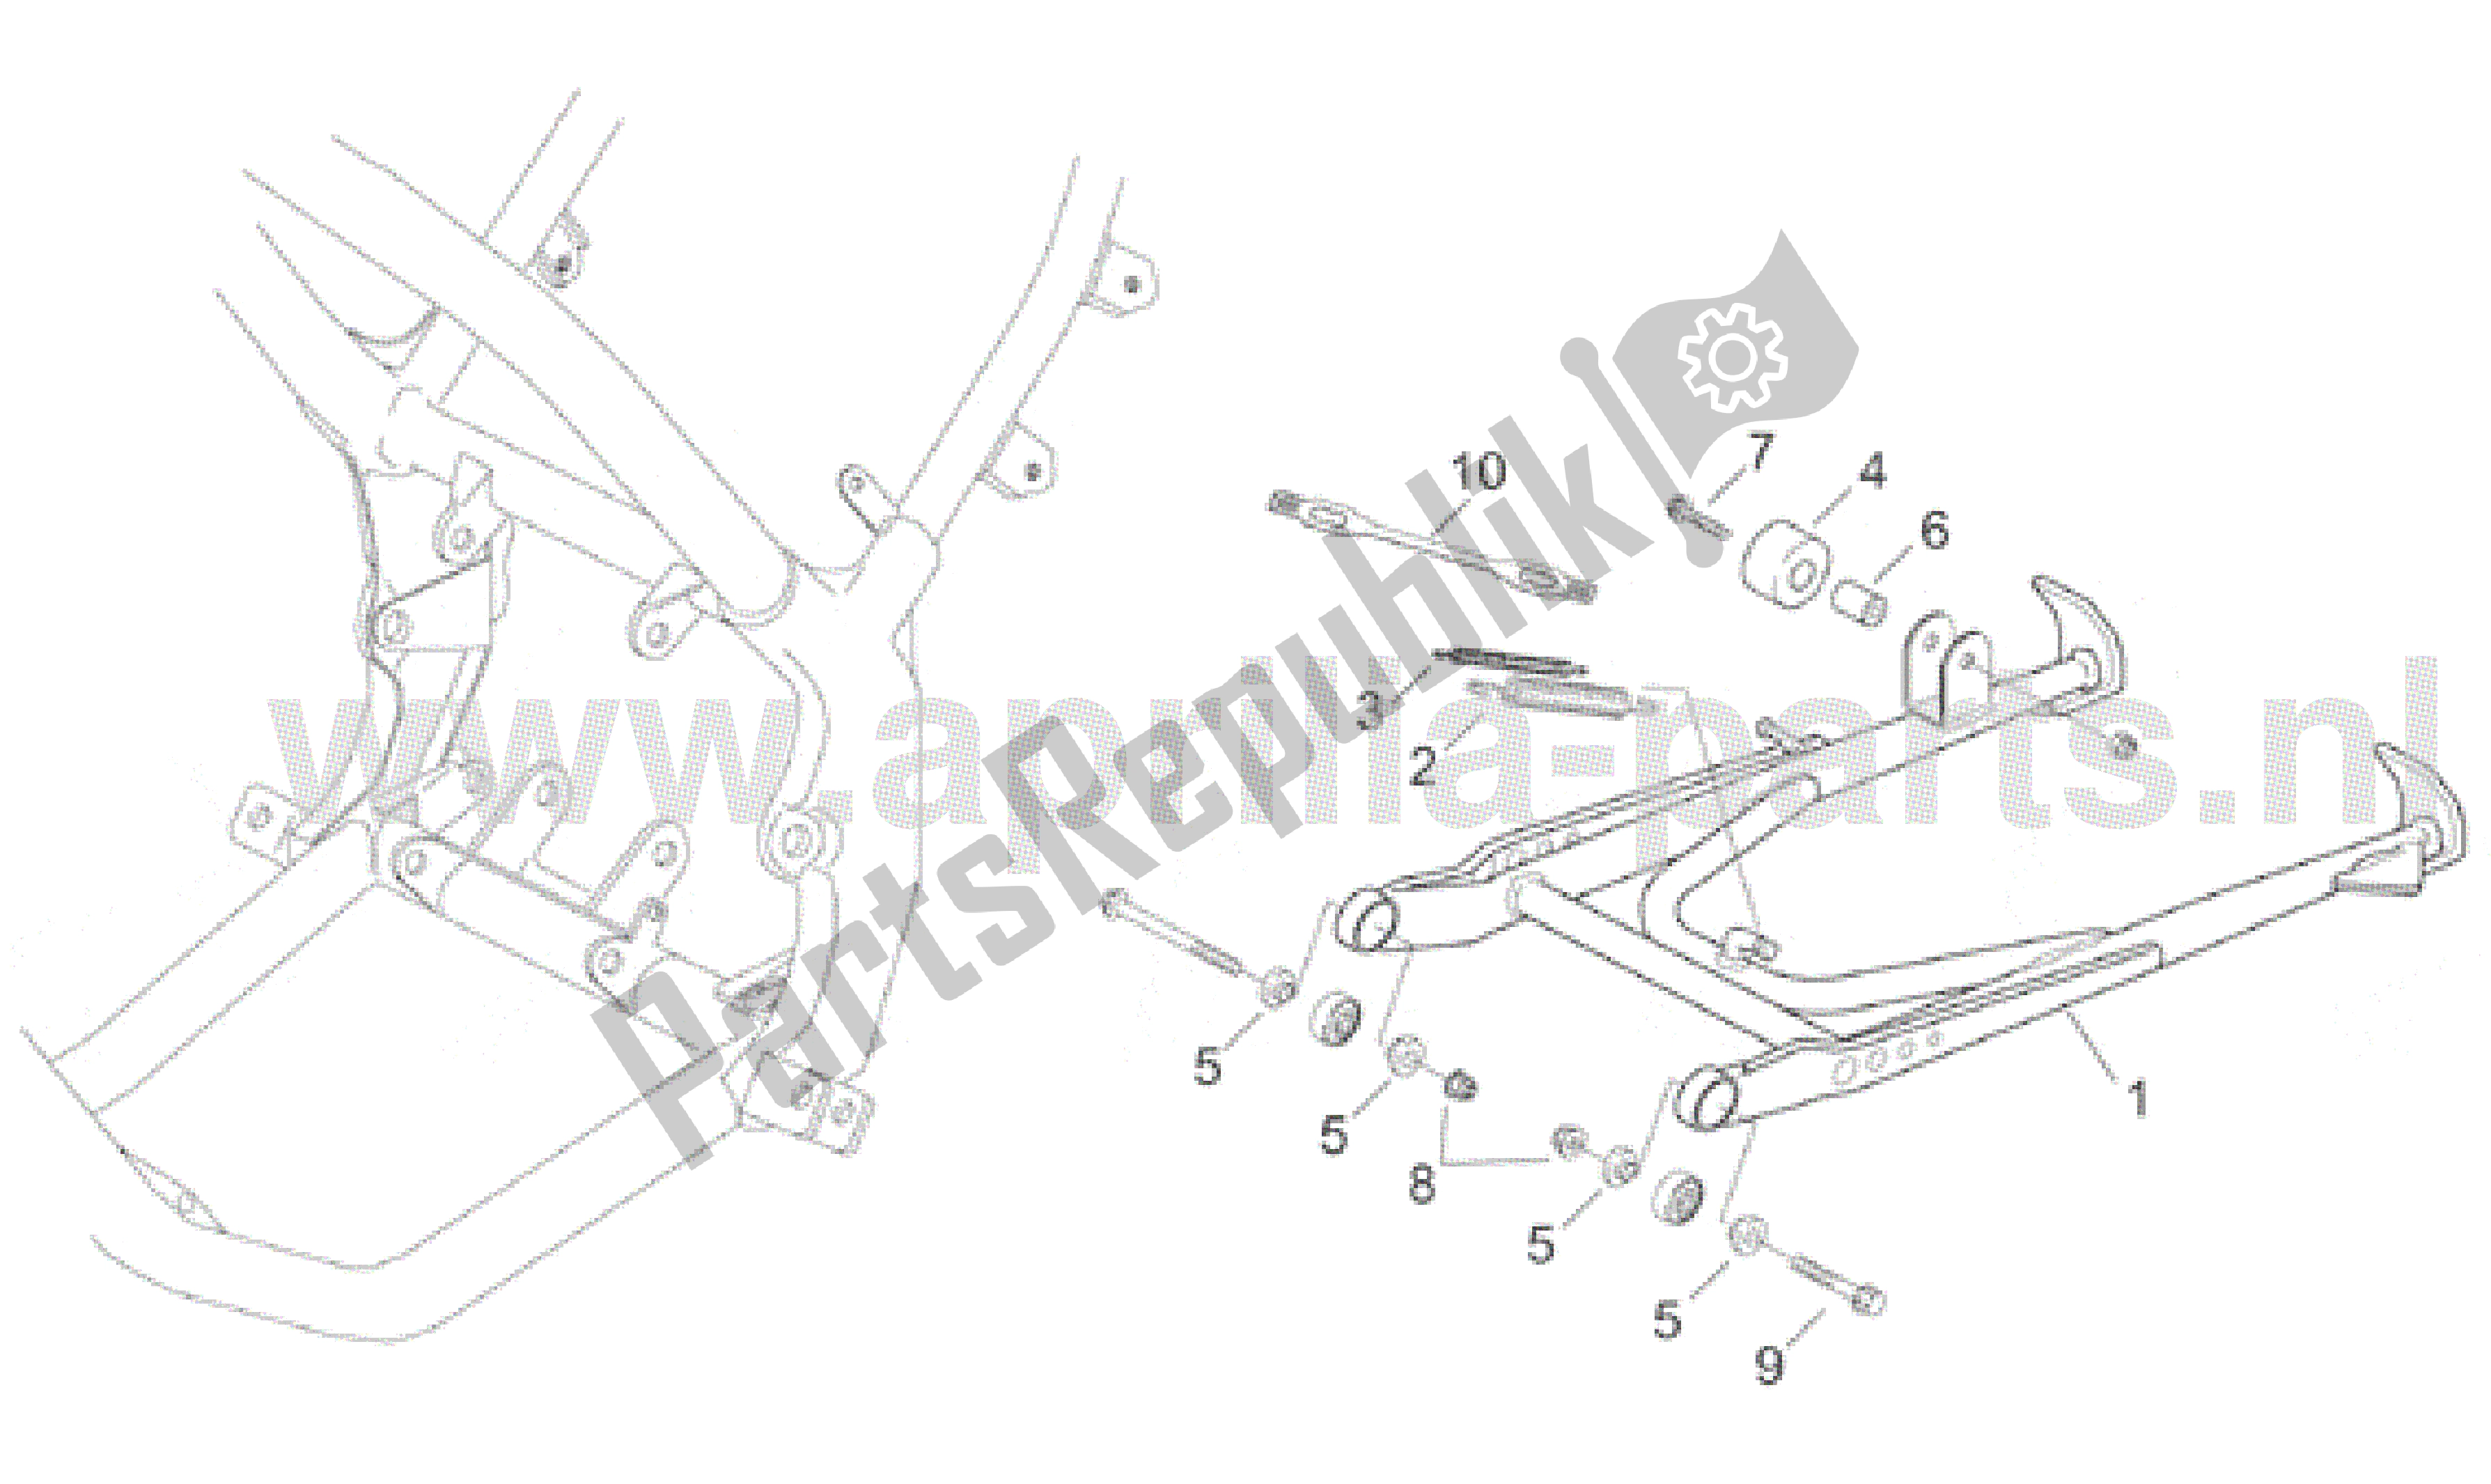 All parts for the Central Stand of the Aprilia RX 50 1995 - 2000